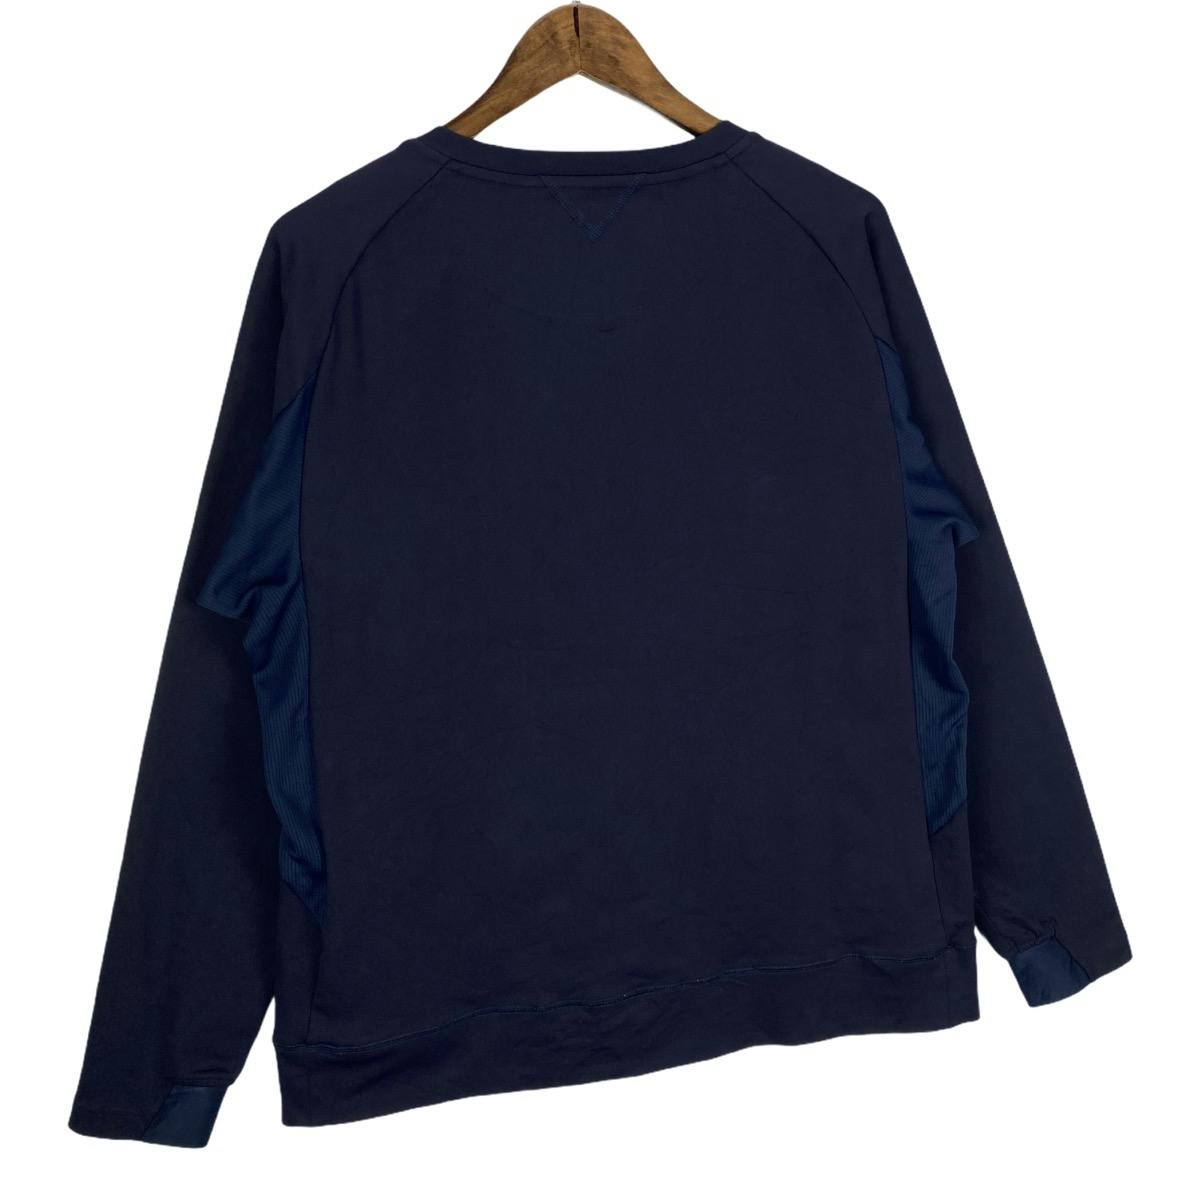 White Mountaineering SS 2016 Collection Sweatshirt - 10